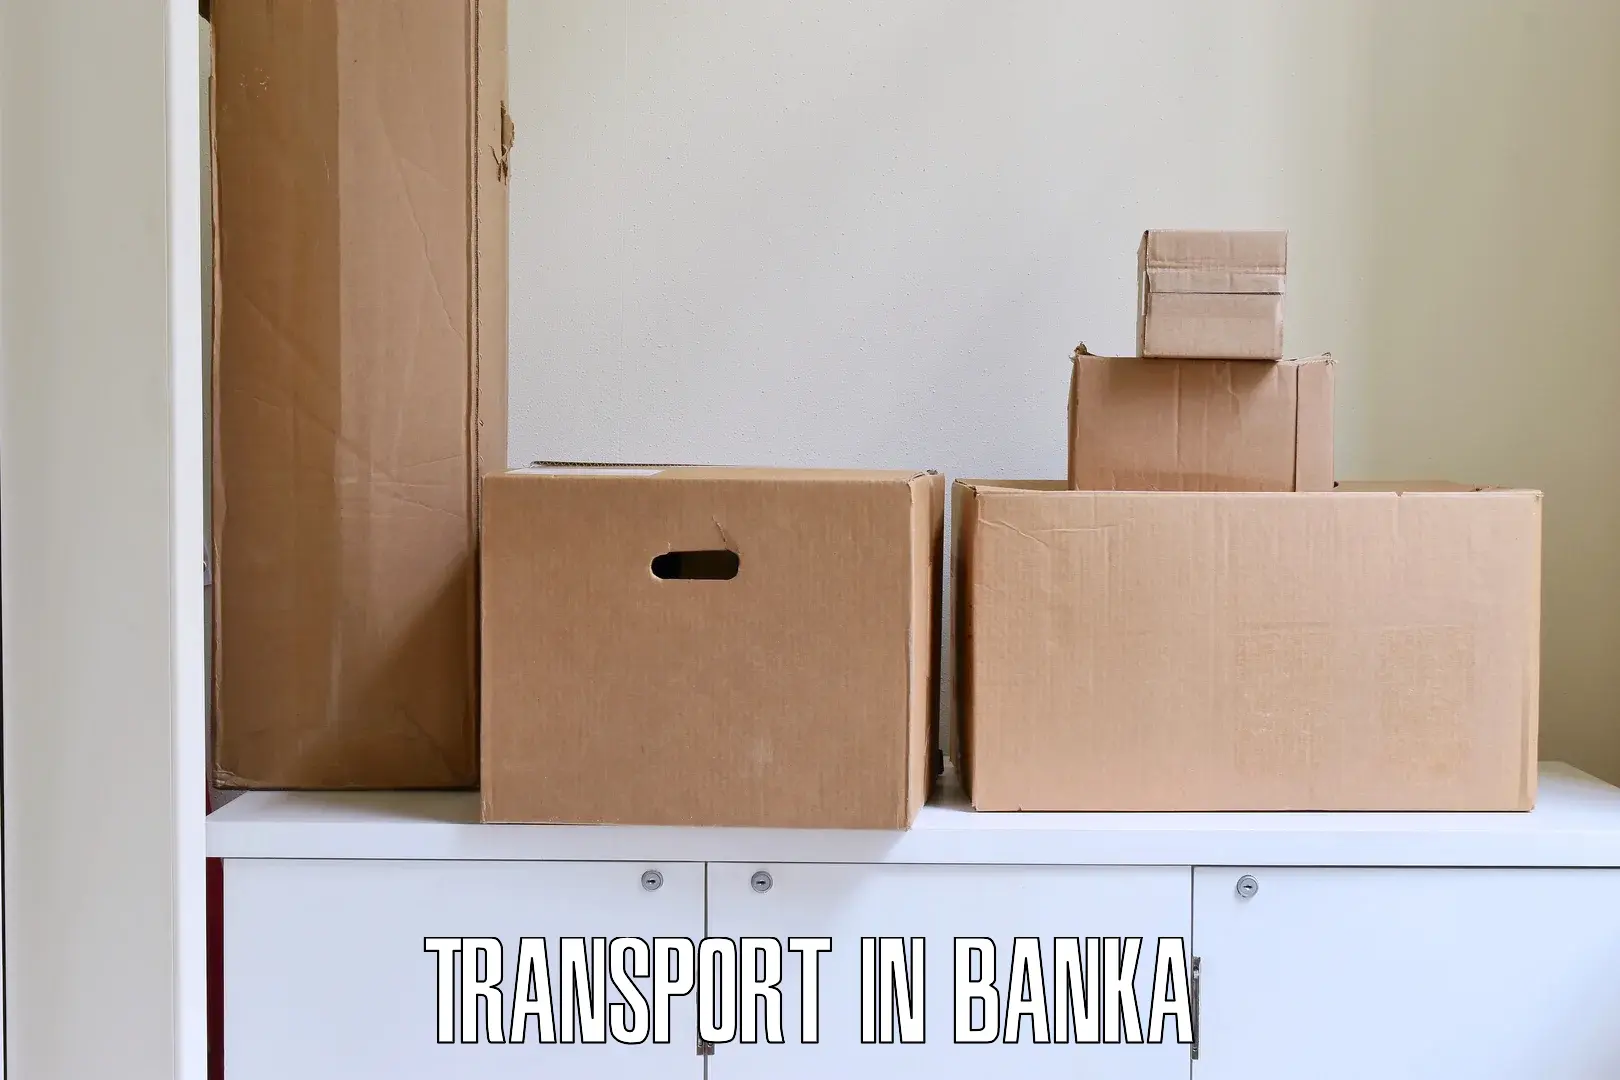 Nationwide transport services in Banka